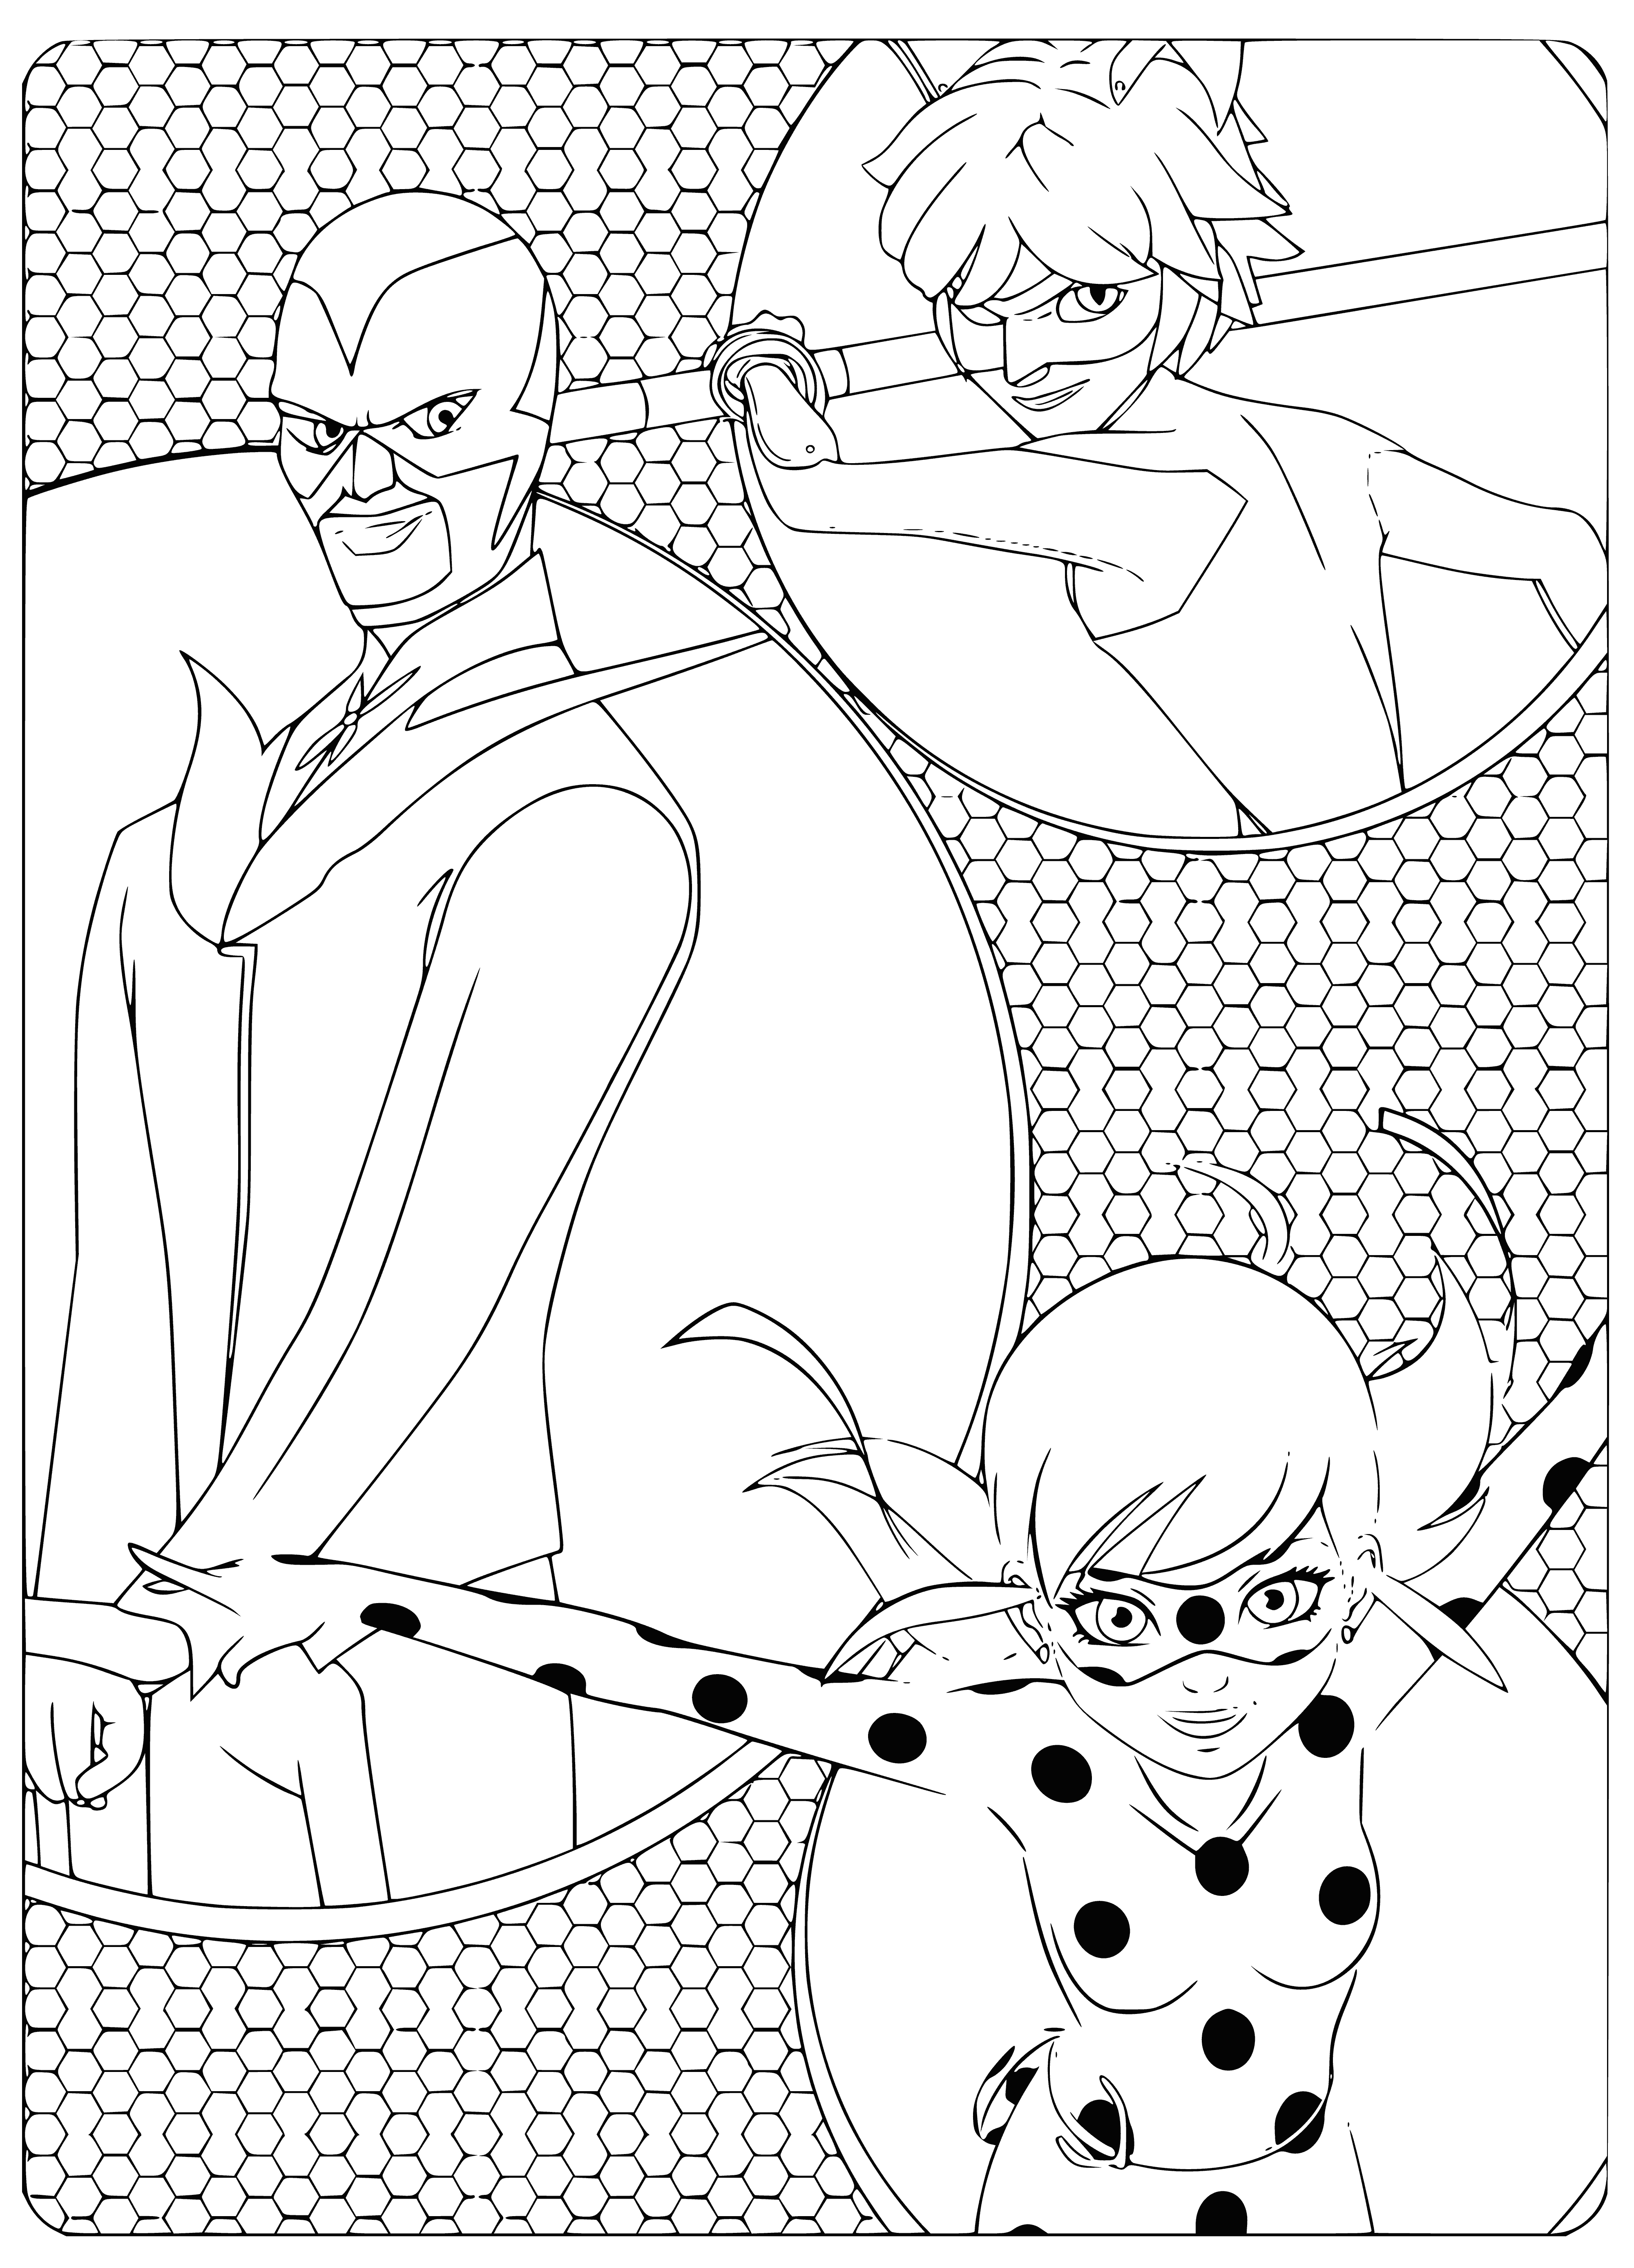 Hawk Moth, Super Cat and Lady Bug coloring page